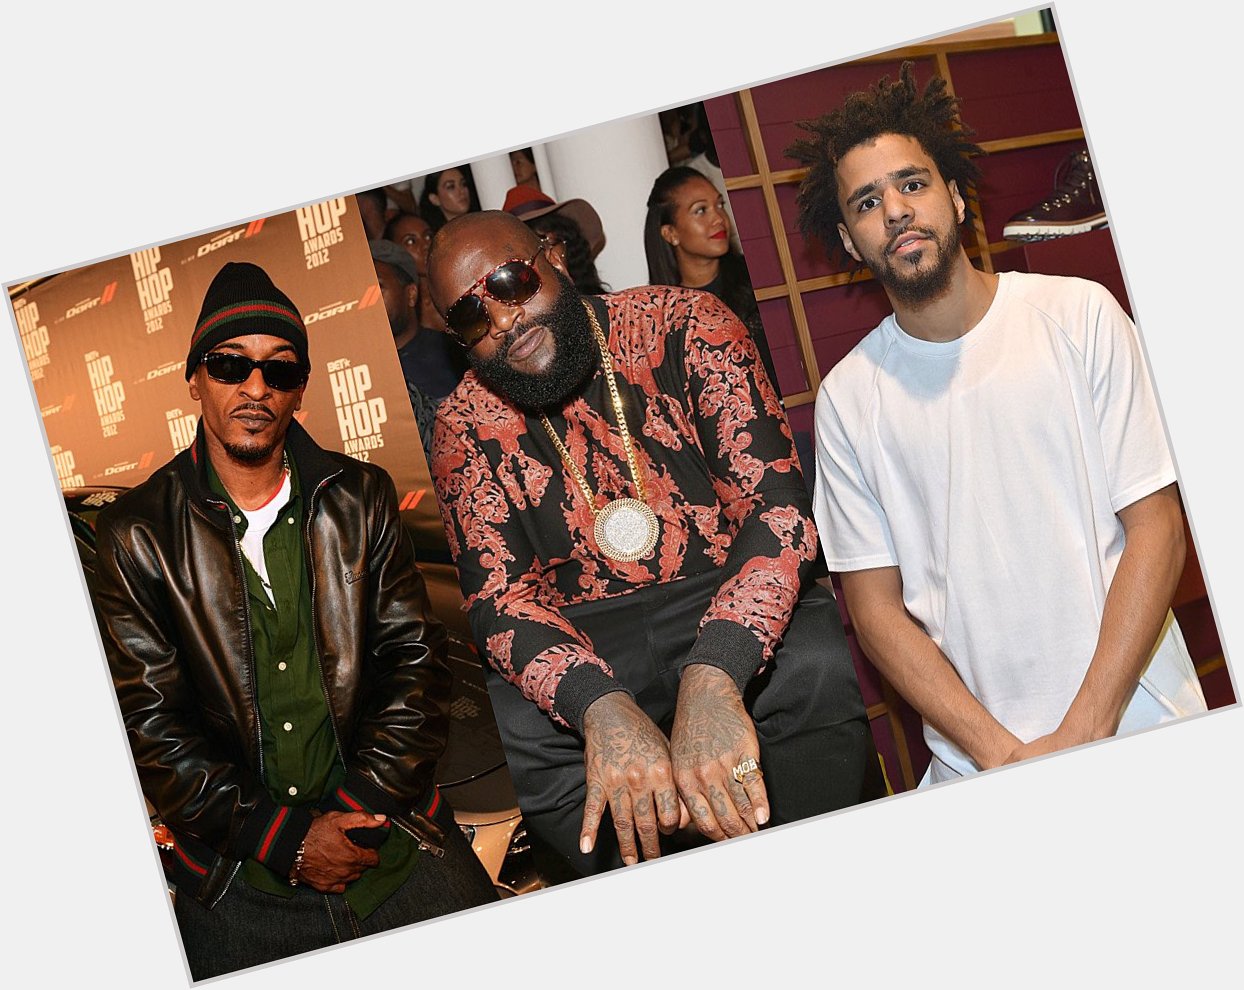 Happy birthday to the legends RAKIM, RICK ROSS and J COLE from your friends at  